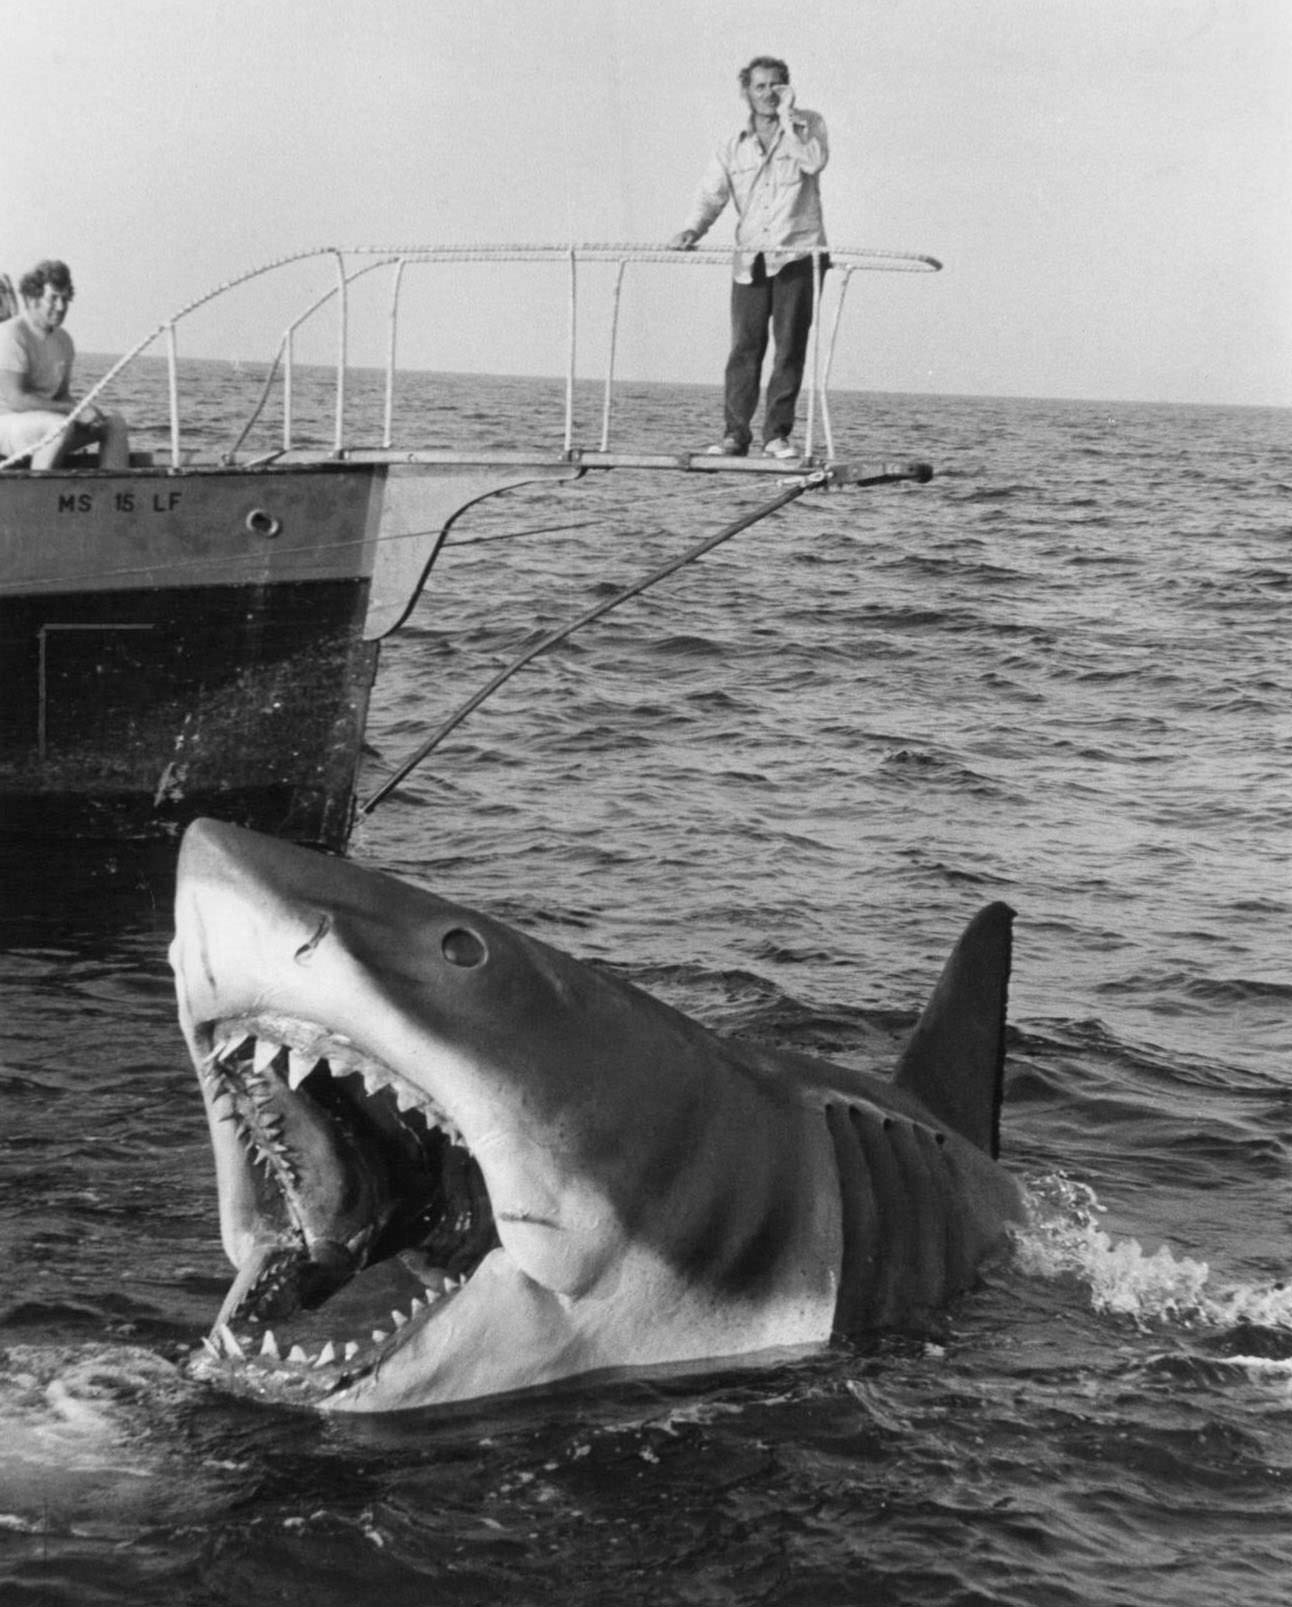 Robert Shaw stands over Jaws in a scene from the film 'Jaws', 1975.